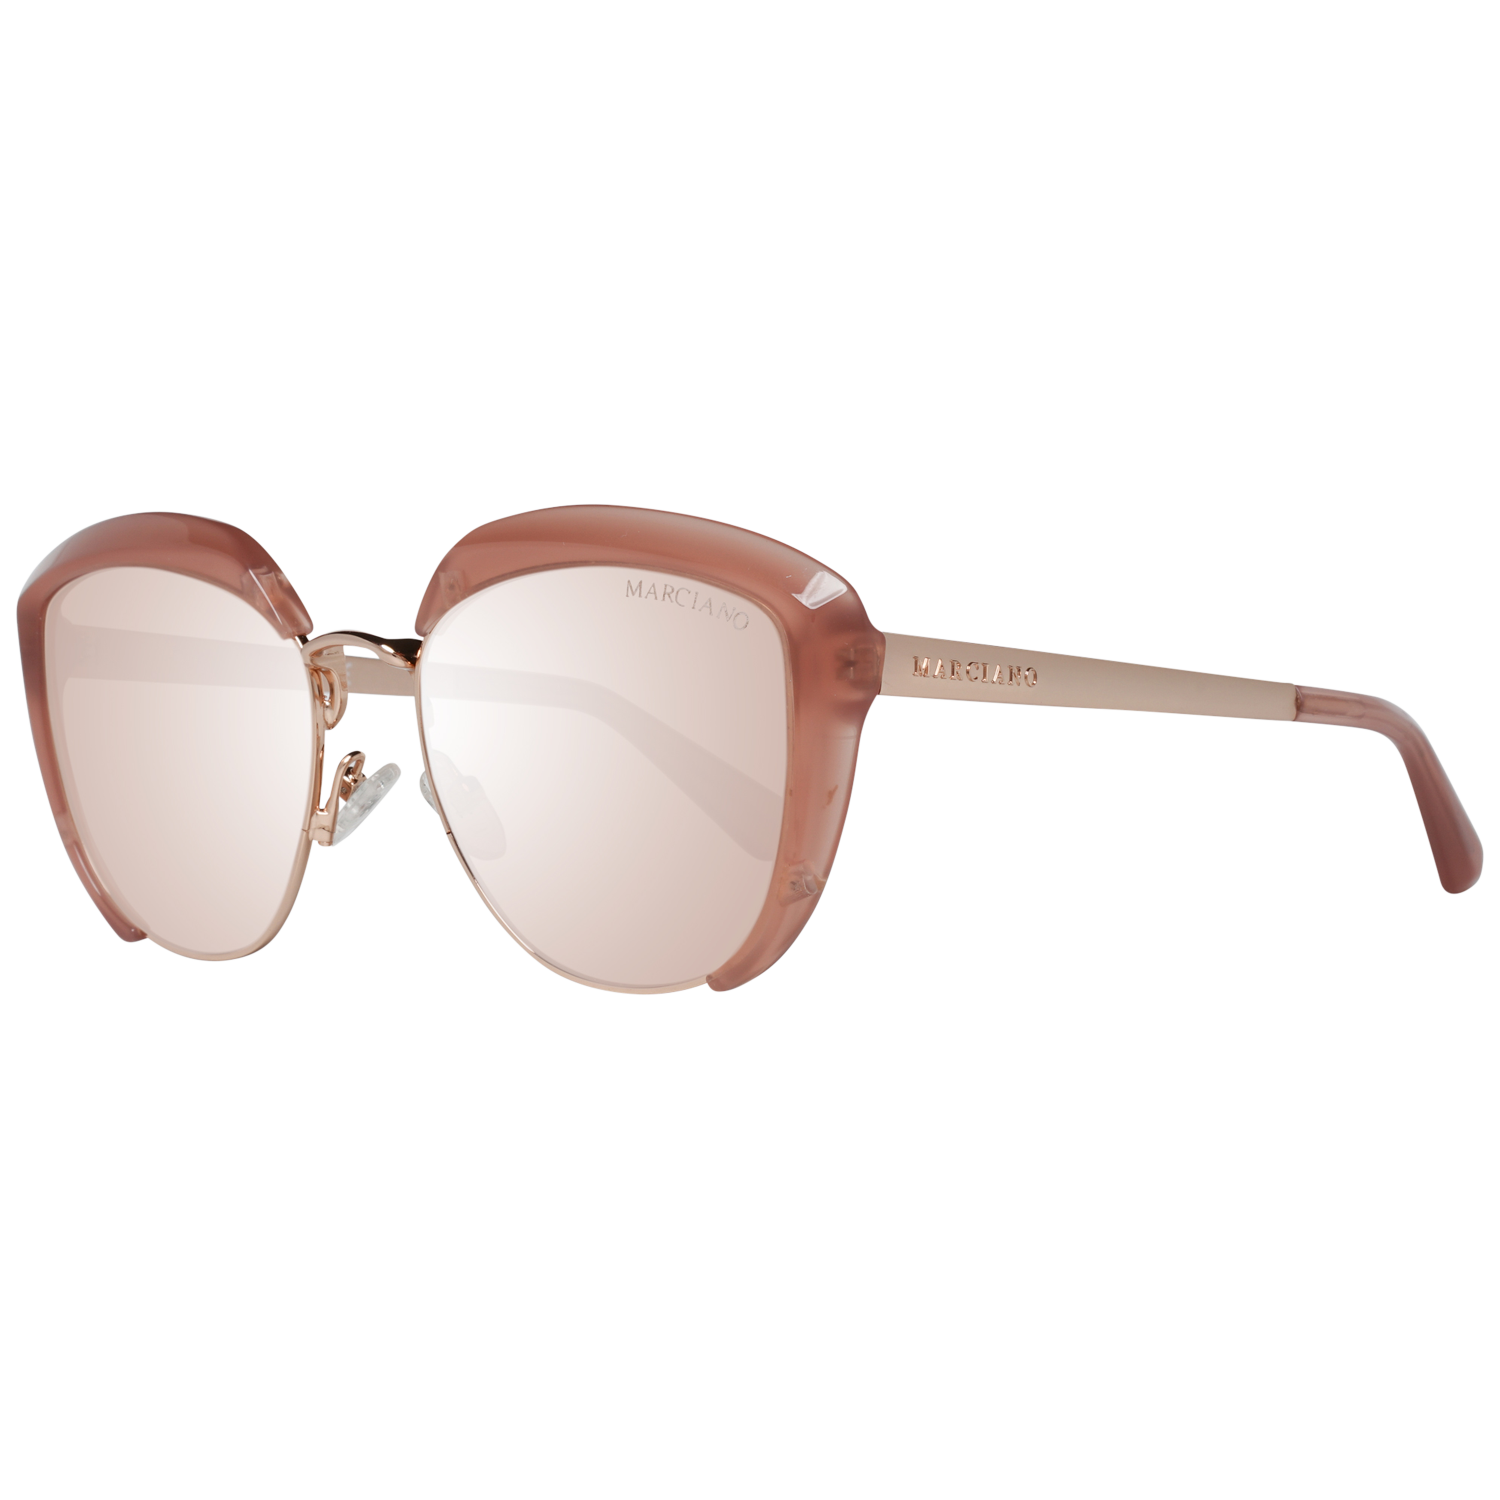 Guess by Marciano Sunglasses GM0791 72Z 54 Women
Frame color: Rose Gold
Lenses color: Rosé Gold
Lenses material: Plastic
Filter category: 2
Style: Cat Eye
Lenses effect: Mirrored
Protection: 100% UVA & UVB
Size: 54-18-140
Lenses width: 54
Lenses height: 48
Bridge width: 18
Frame width: 140
Temples length: 140
Shipment includes: Case, cleaning cloth
Spring hinge: No